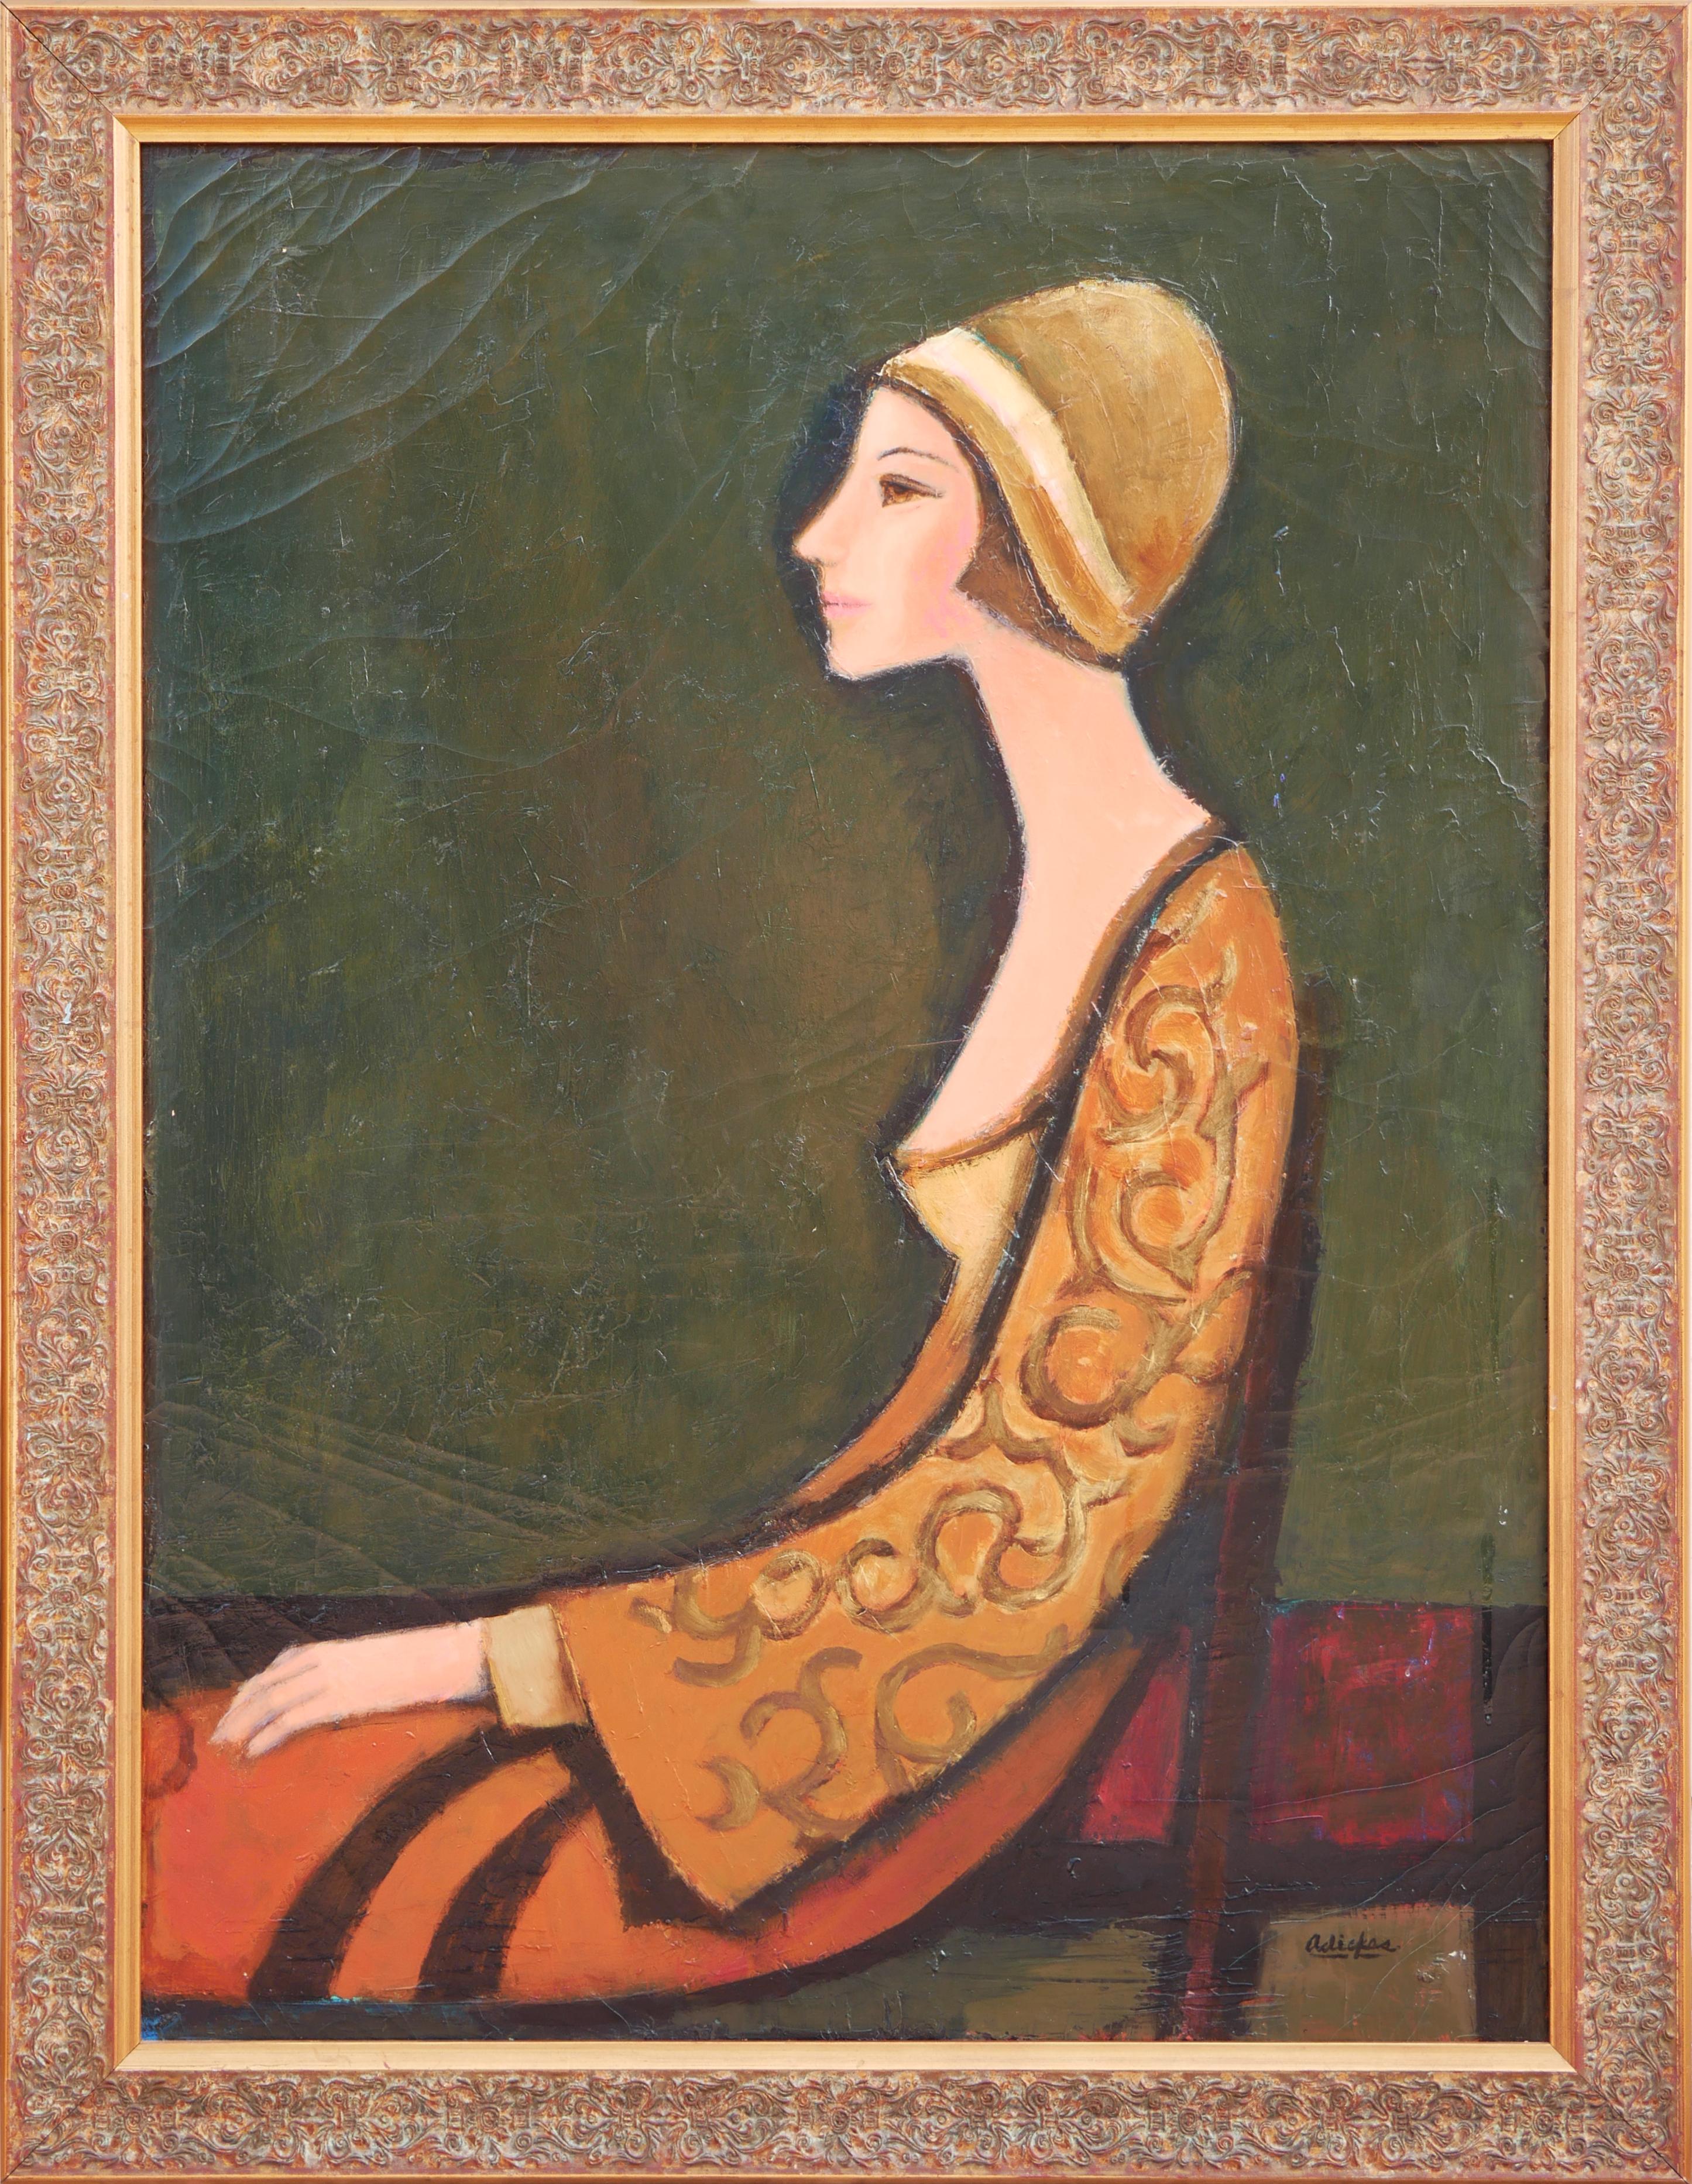 David Adickes - "Elegant Lady, Gold Brown" Modern Abstract Figurative  Female Portrait Painting For Sale at 1stDibs